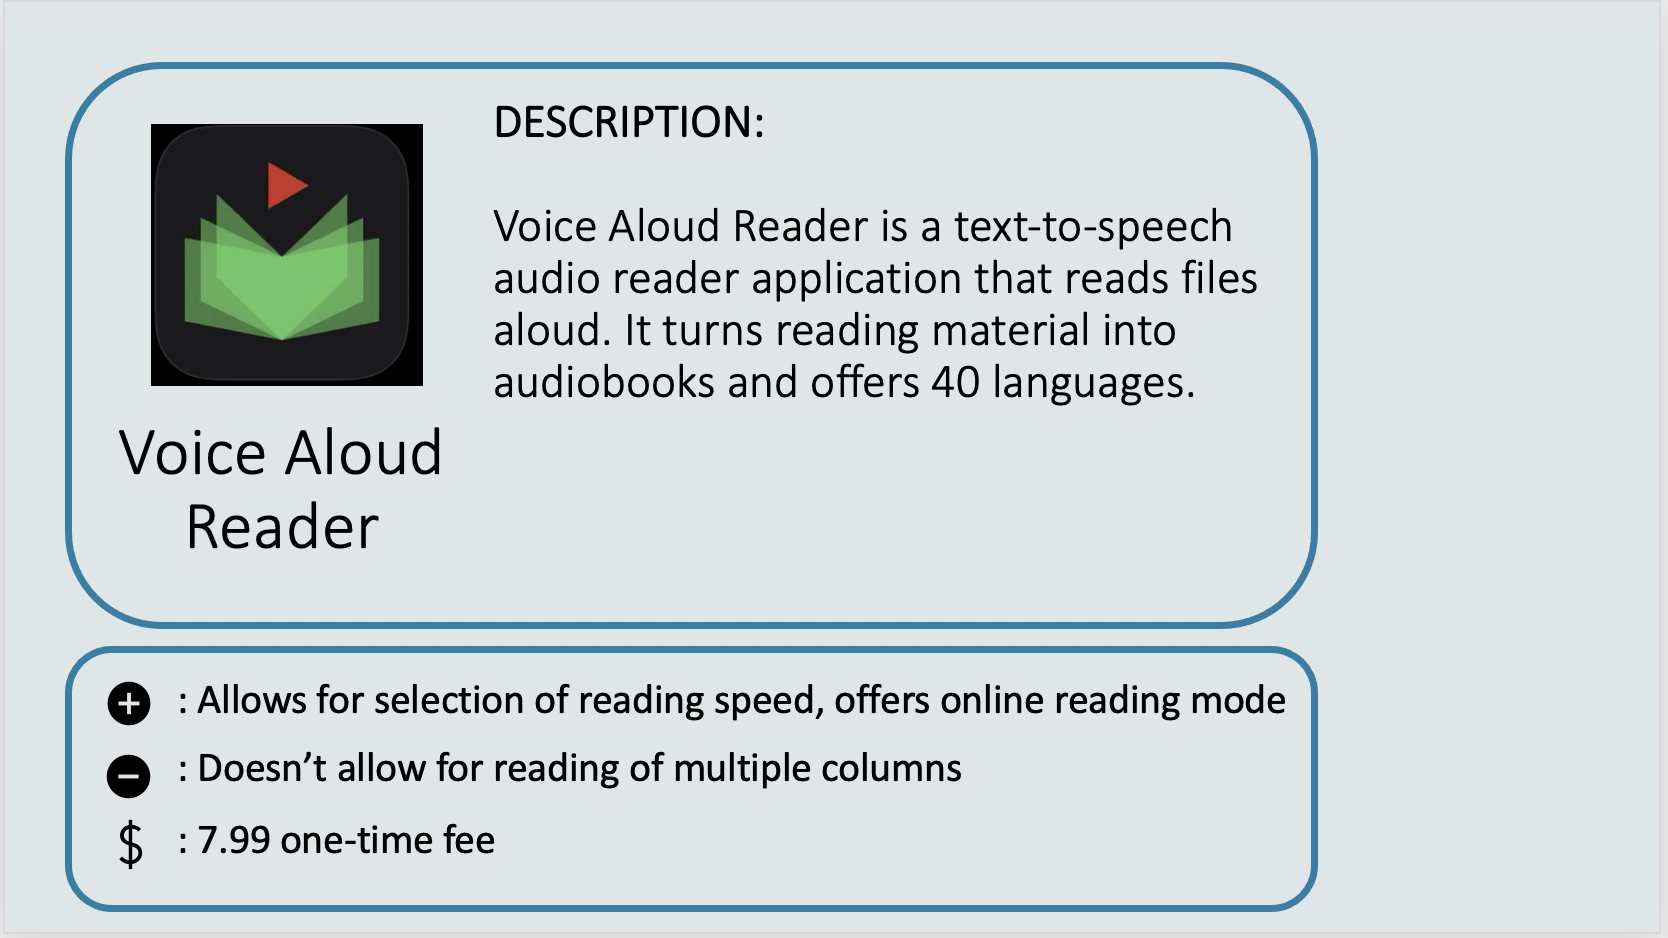 VOICE ALOUD READER - Voice Aloud Reader is a text-to-speech audio reader application that reads files aloud. It turns reading material into audiobooks and offers 40 languages. Positive: Allows for selection of reading speed, offers online reading mode. Negative: Doesn’t allow for reading of multiple columns. Cost: $7.99 one-time fee